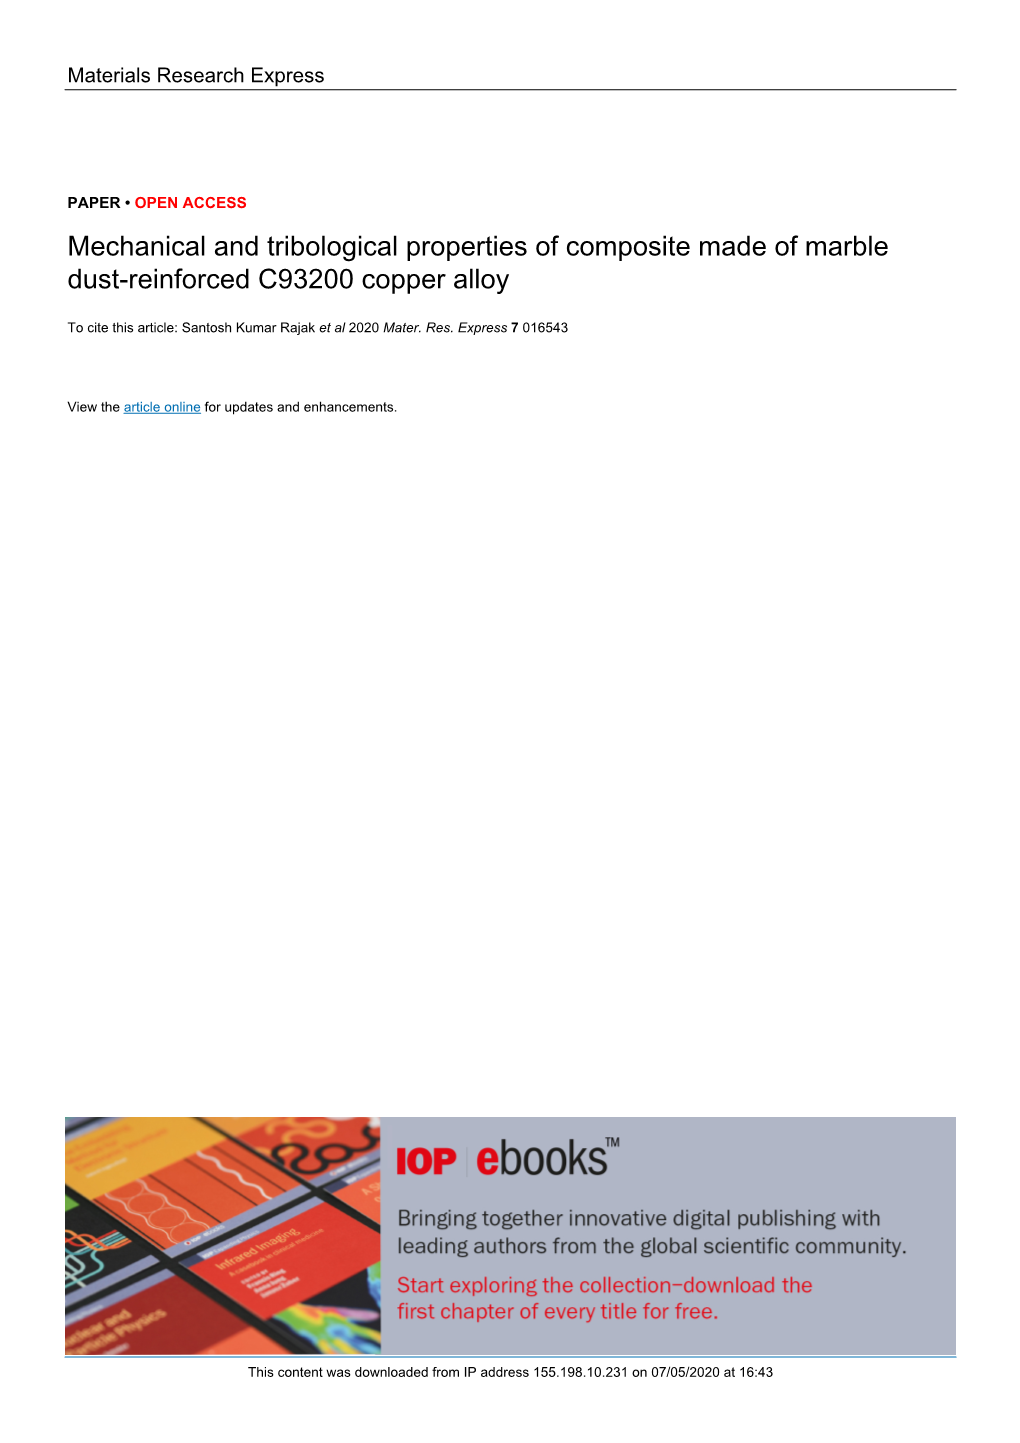 Mechanical and Tribological Properties of Composite Made of Marble Dust-Reinforced C93200 Copper Alloy